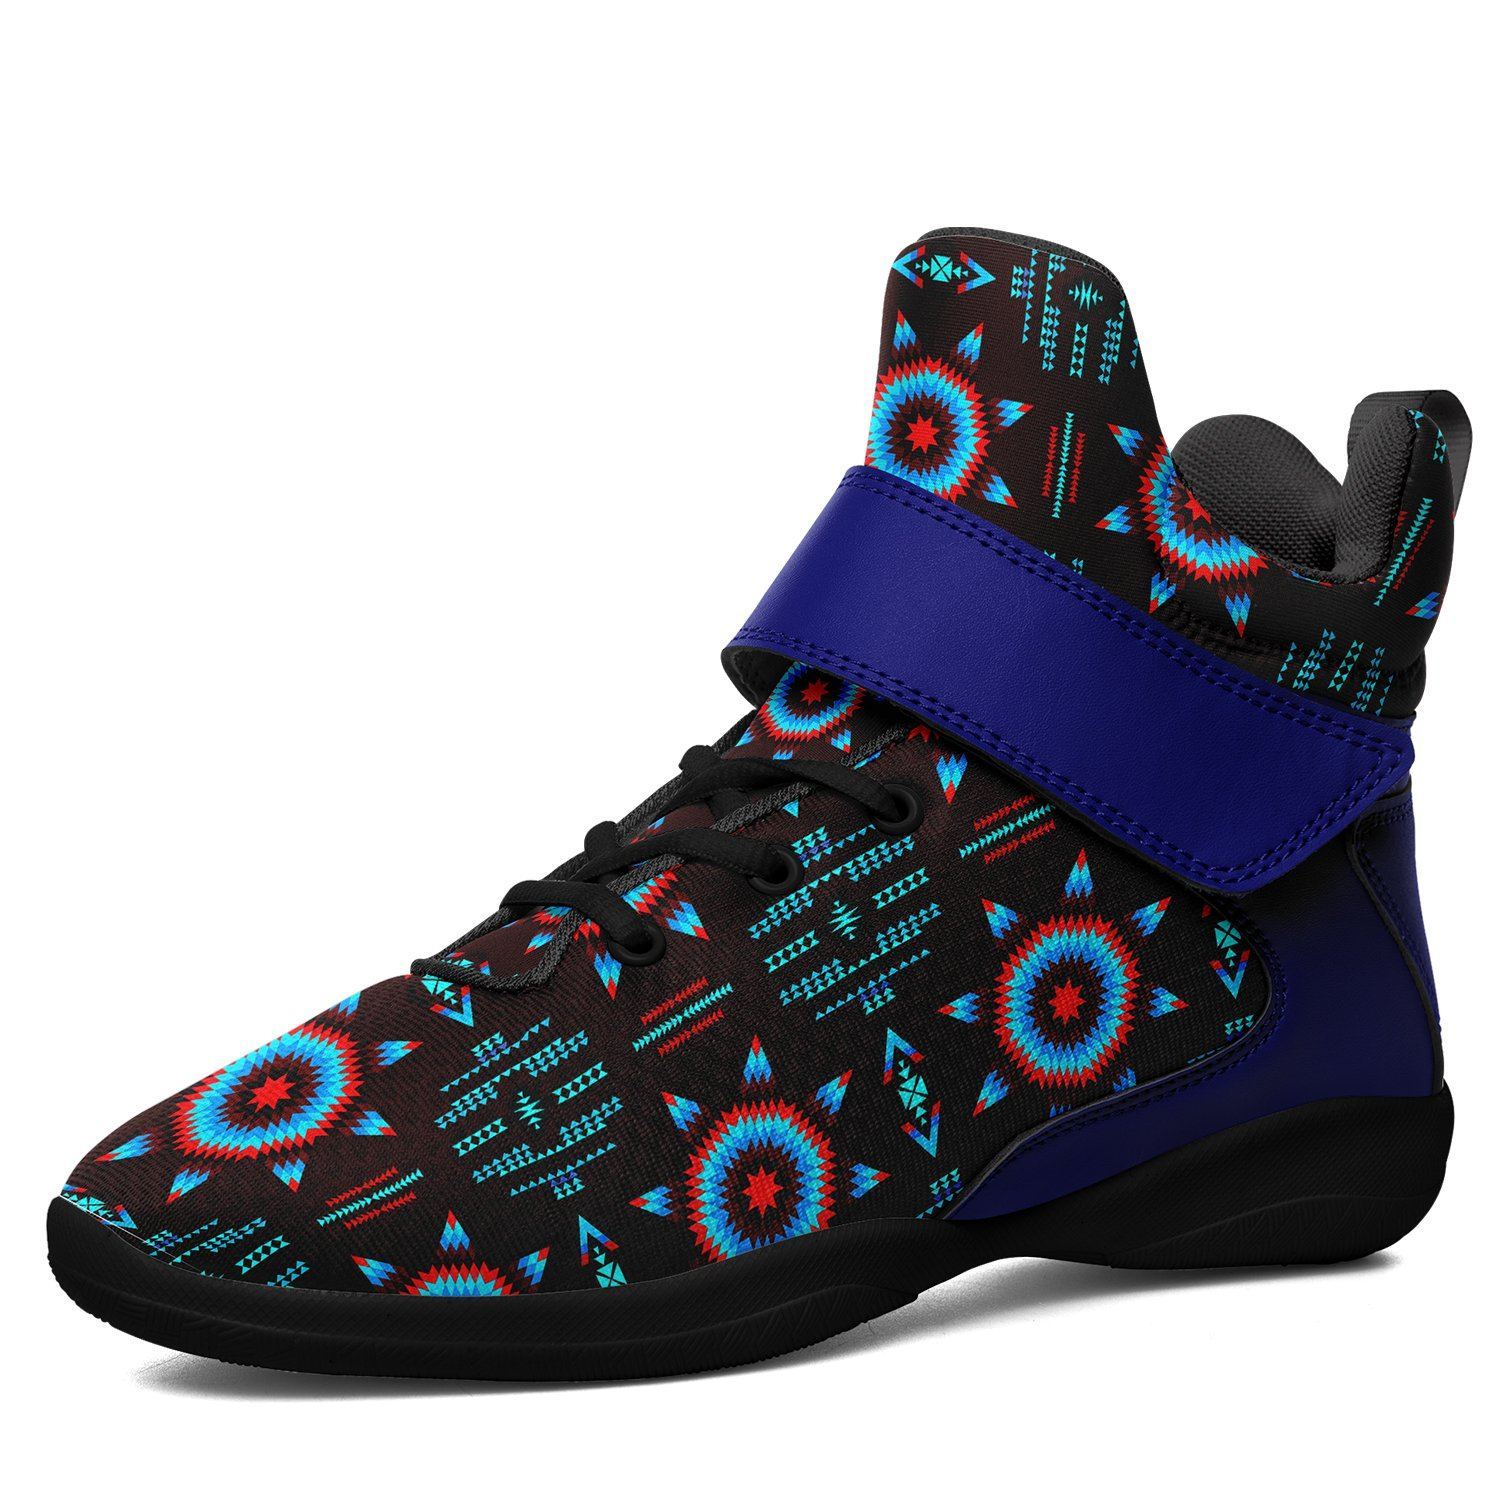 Rising Star Corn Moon Ipottaa Basketball / Sport High Top Shoes - Black Sole 49 Dzine US Men 7 / EUR 40 Black Sole with Blue Strap 